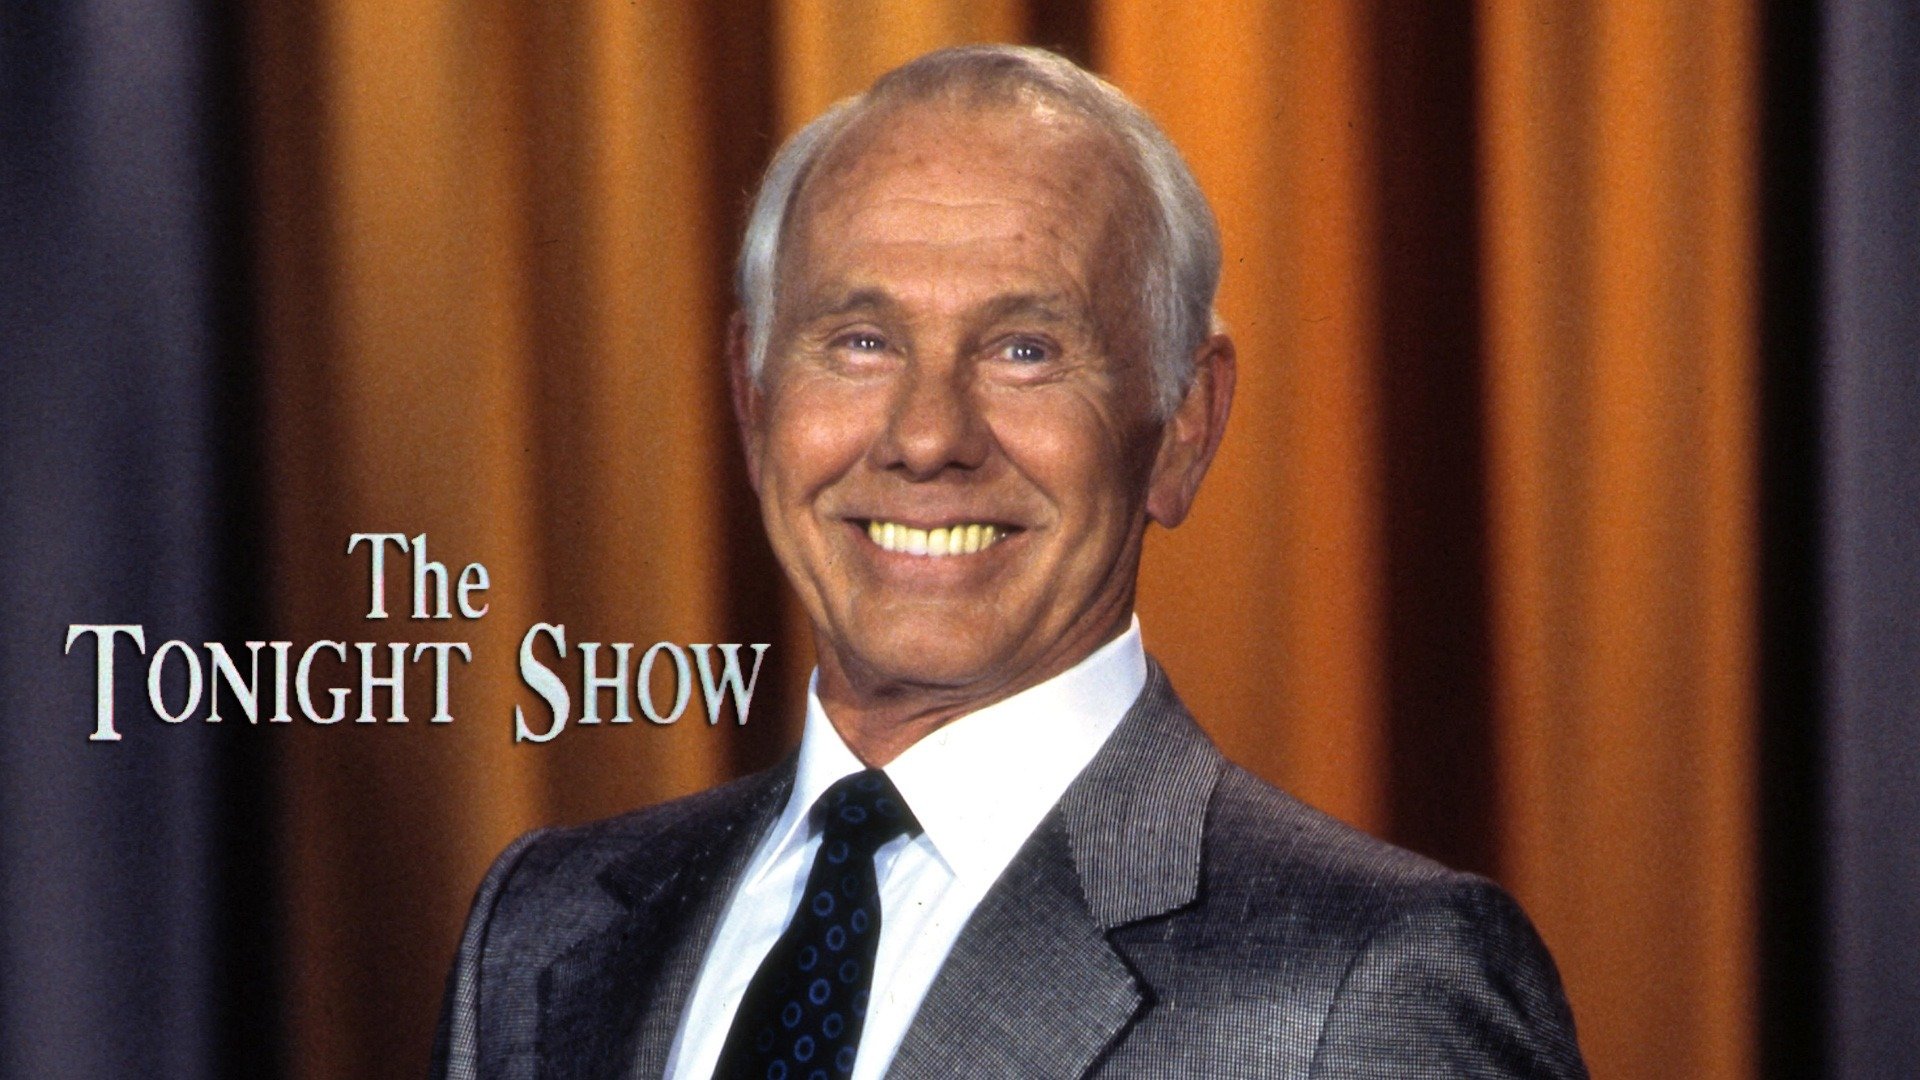 The Tonight Show Starring Johnny Carson - NBC Talk Show - Where To Watch